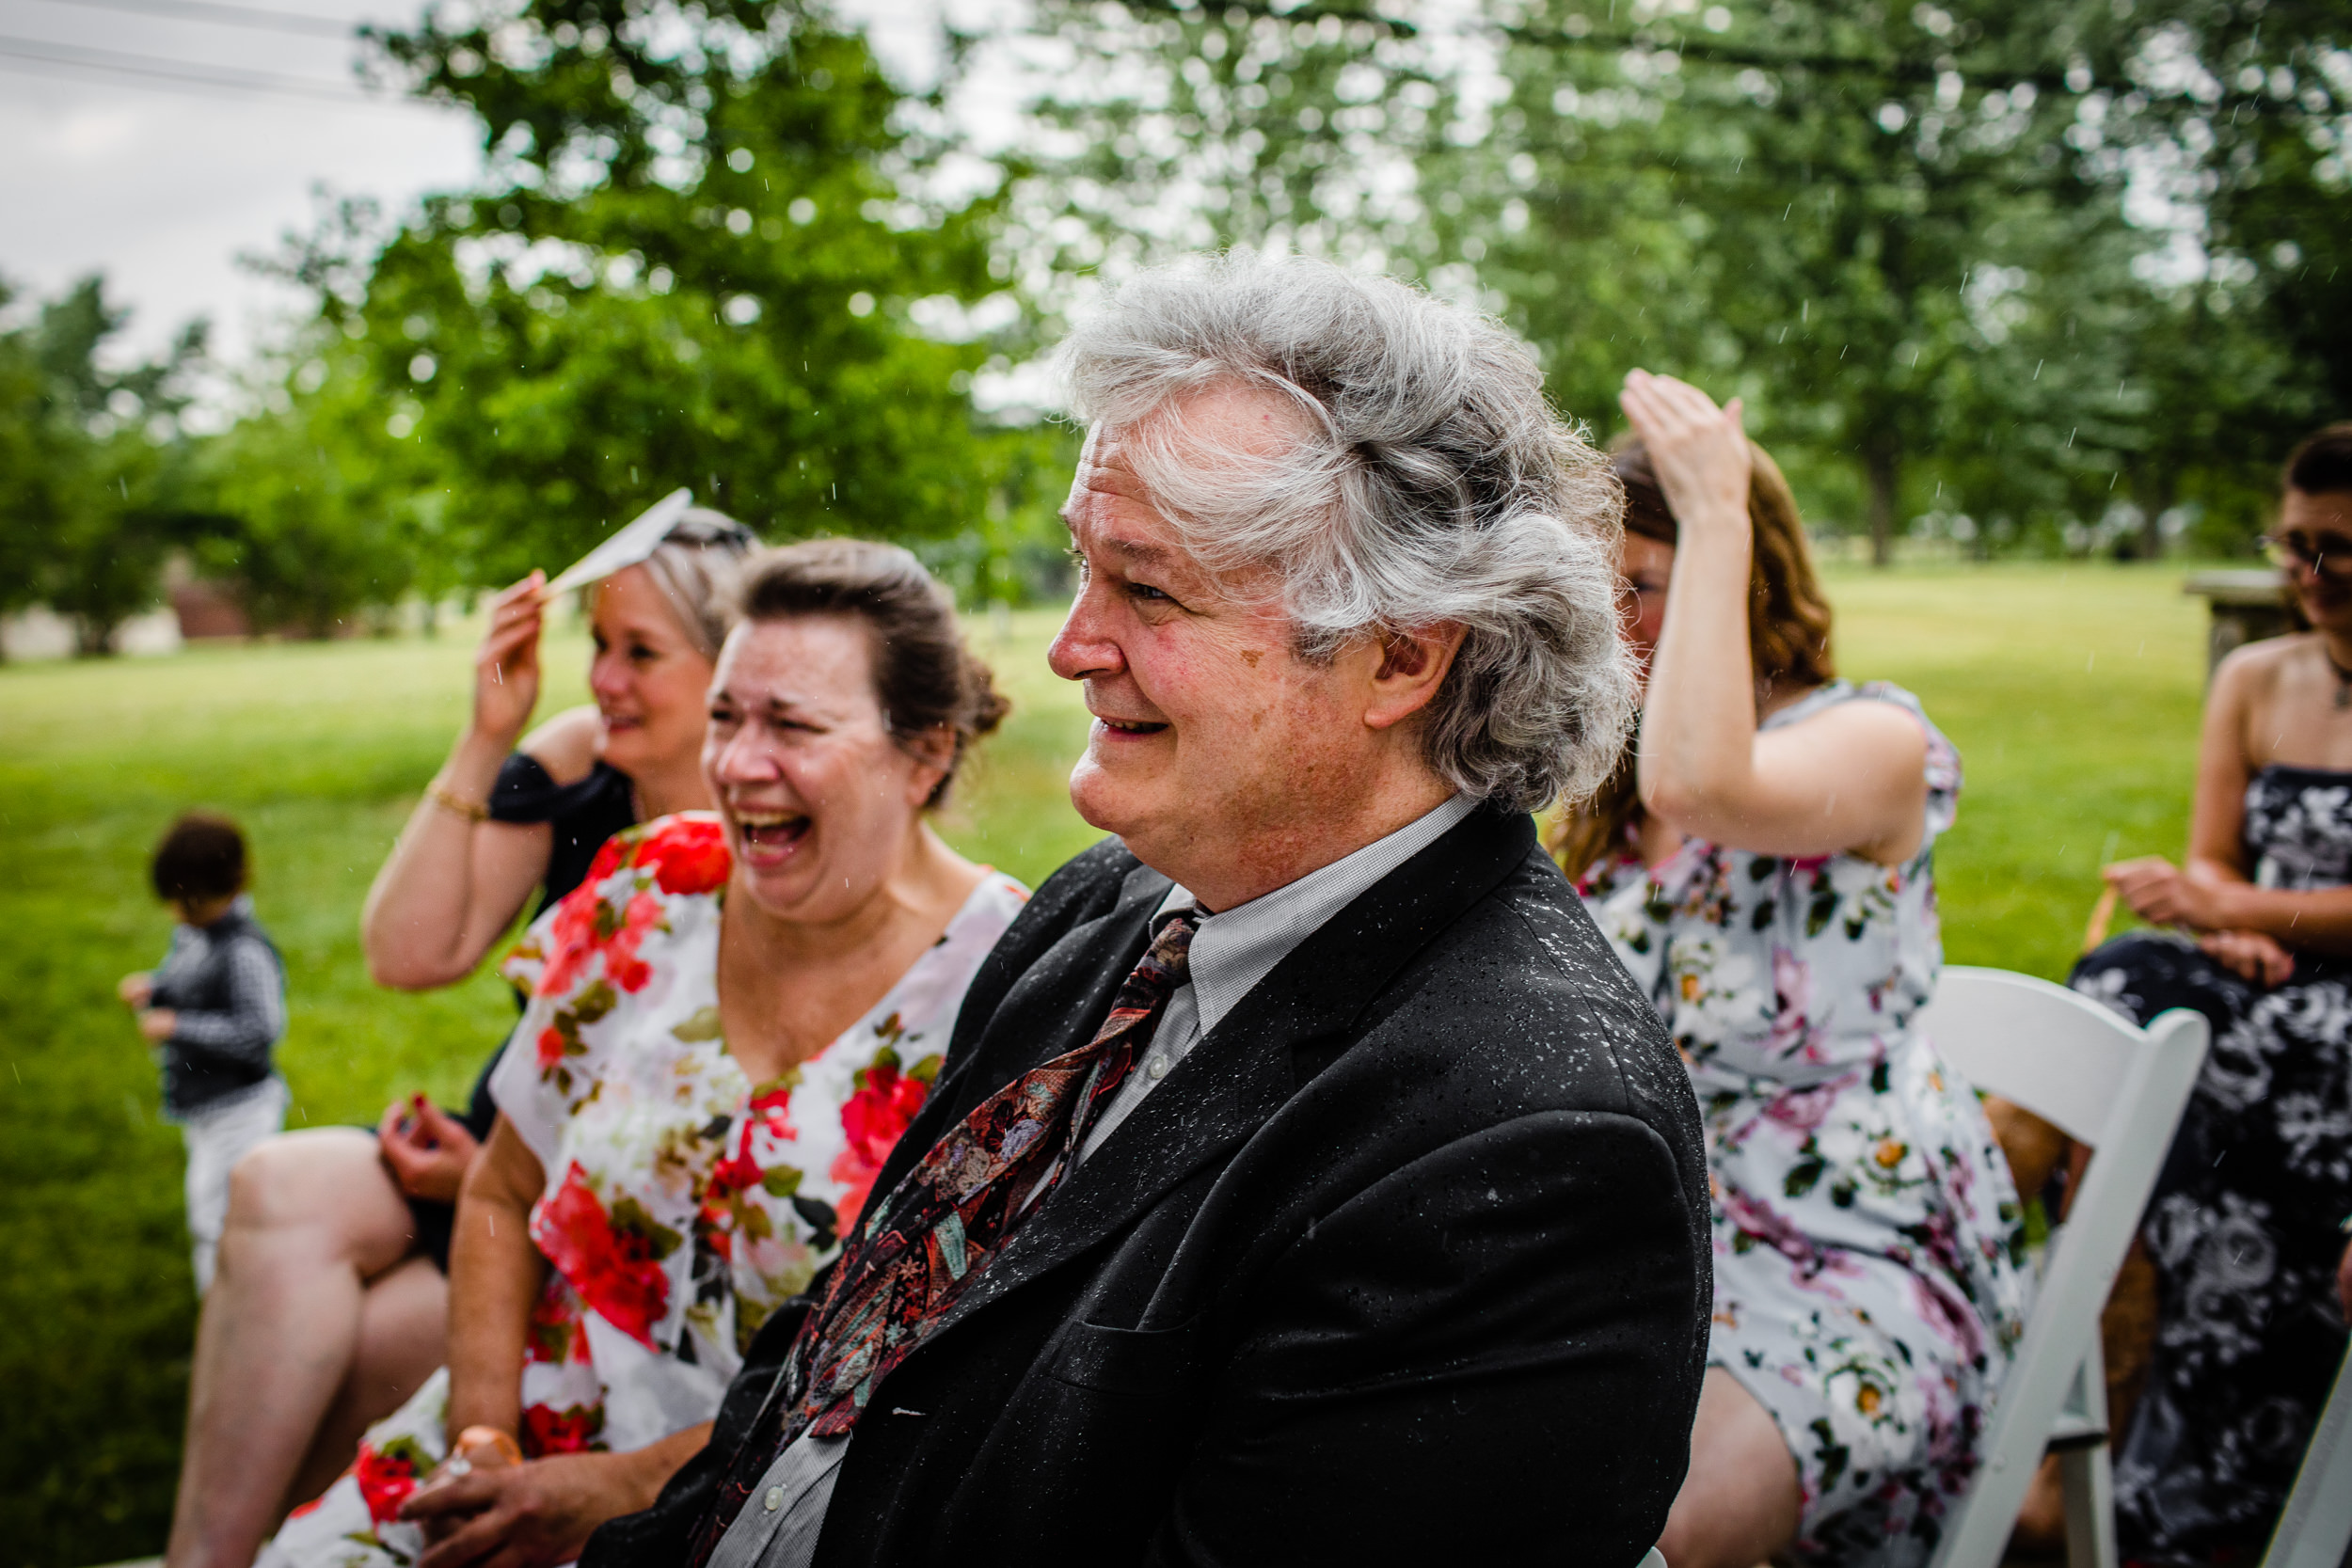 Guests laugh as rain comes down during a backyard wedding in New Lenox, Illinois.